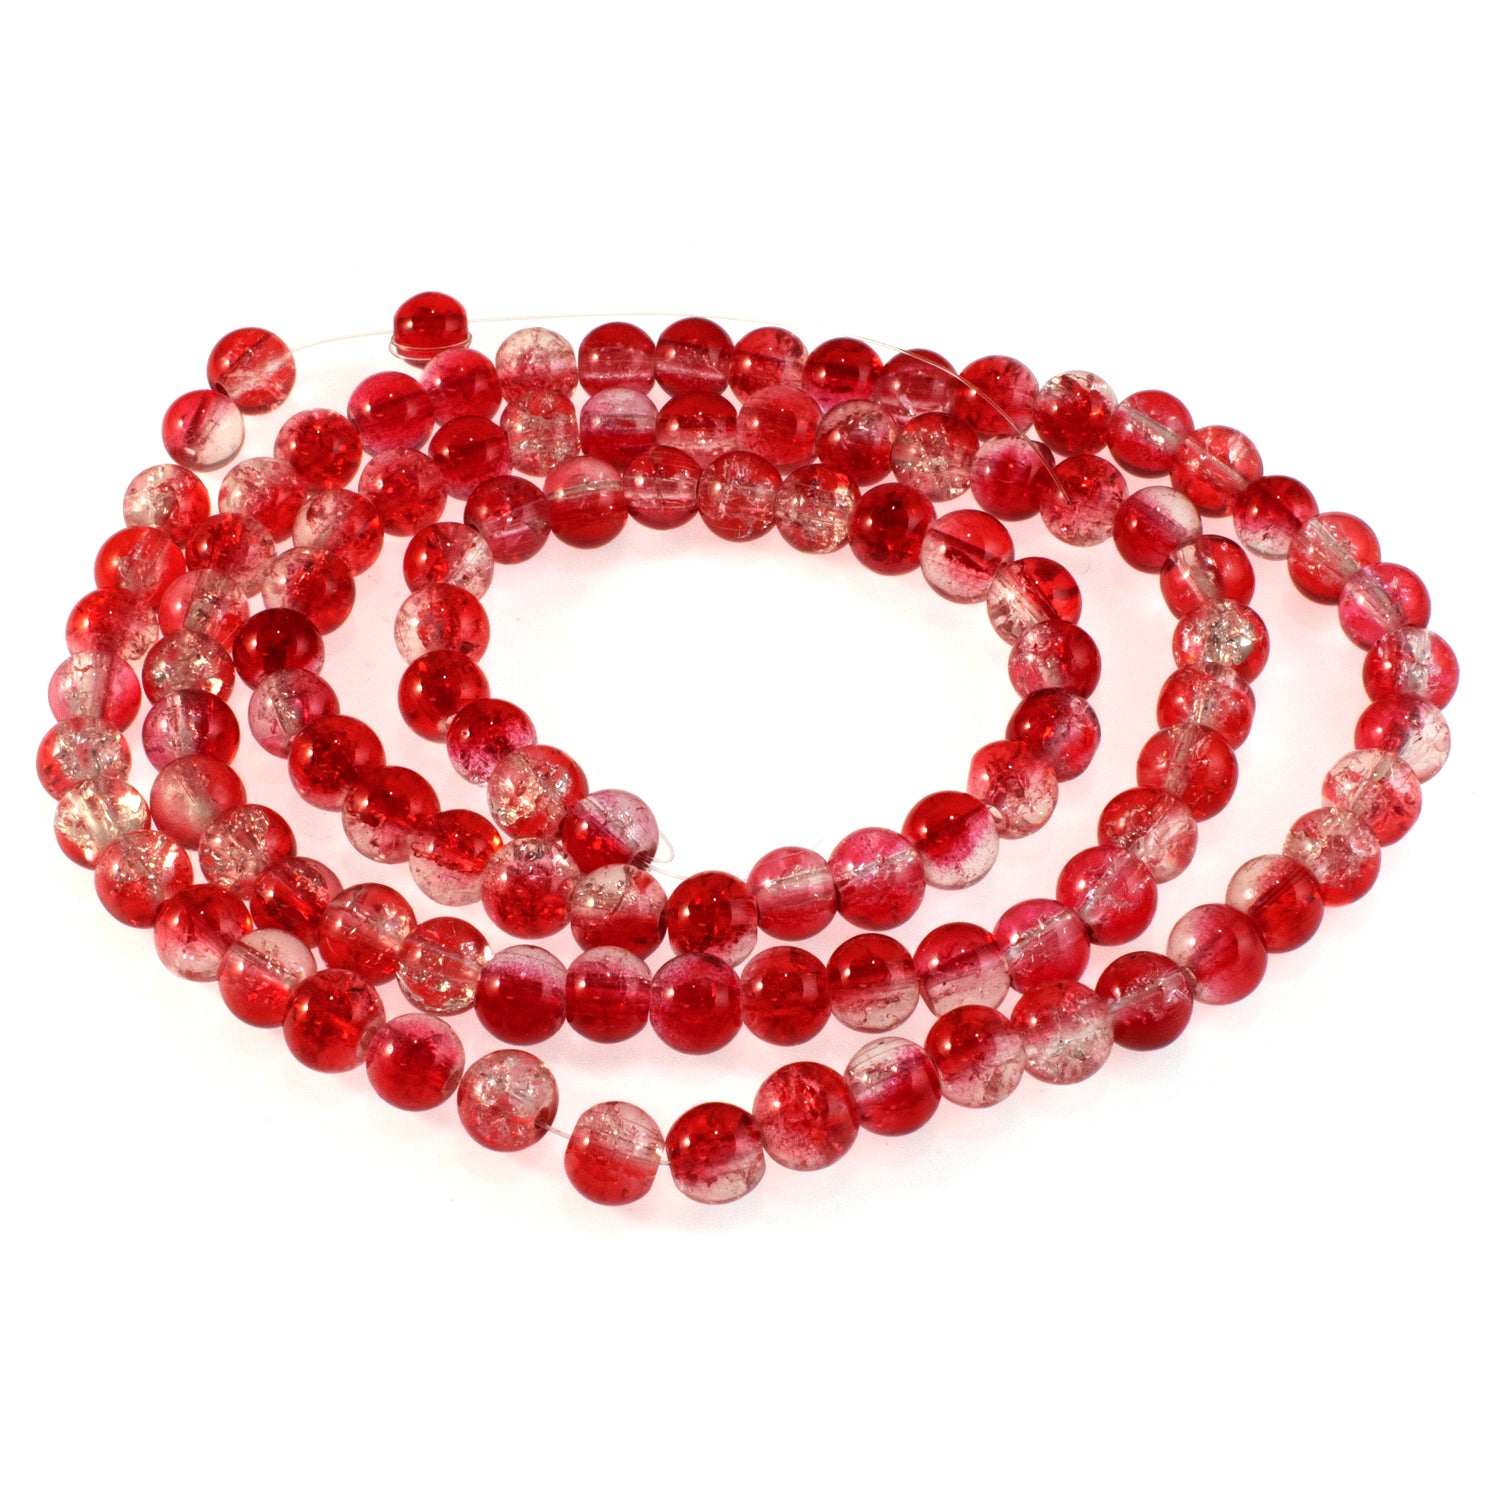 6mm Red Glass Beads, Smooth Round Ball Glass Loose Beads / GB6-04